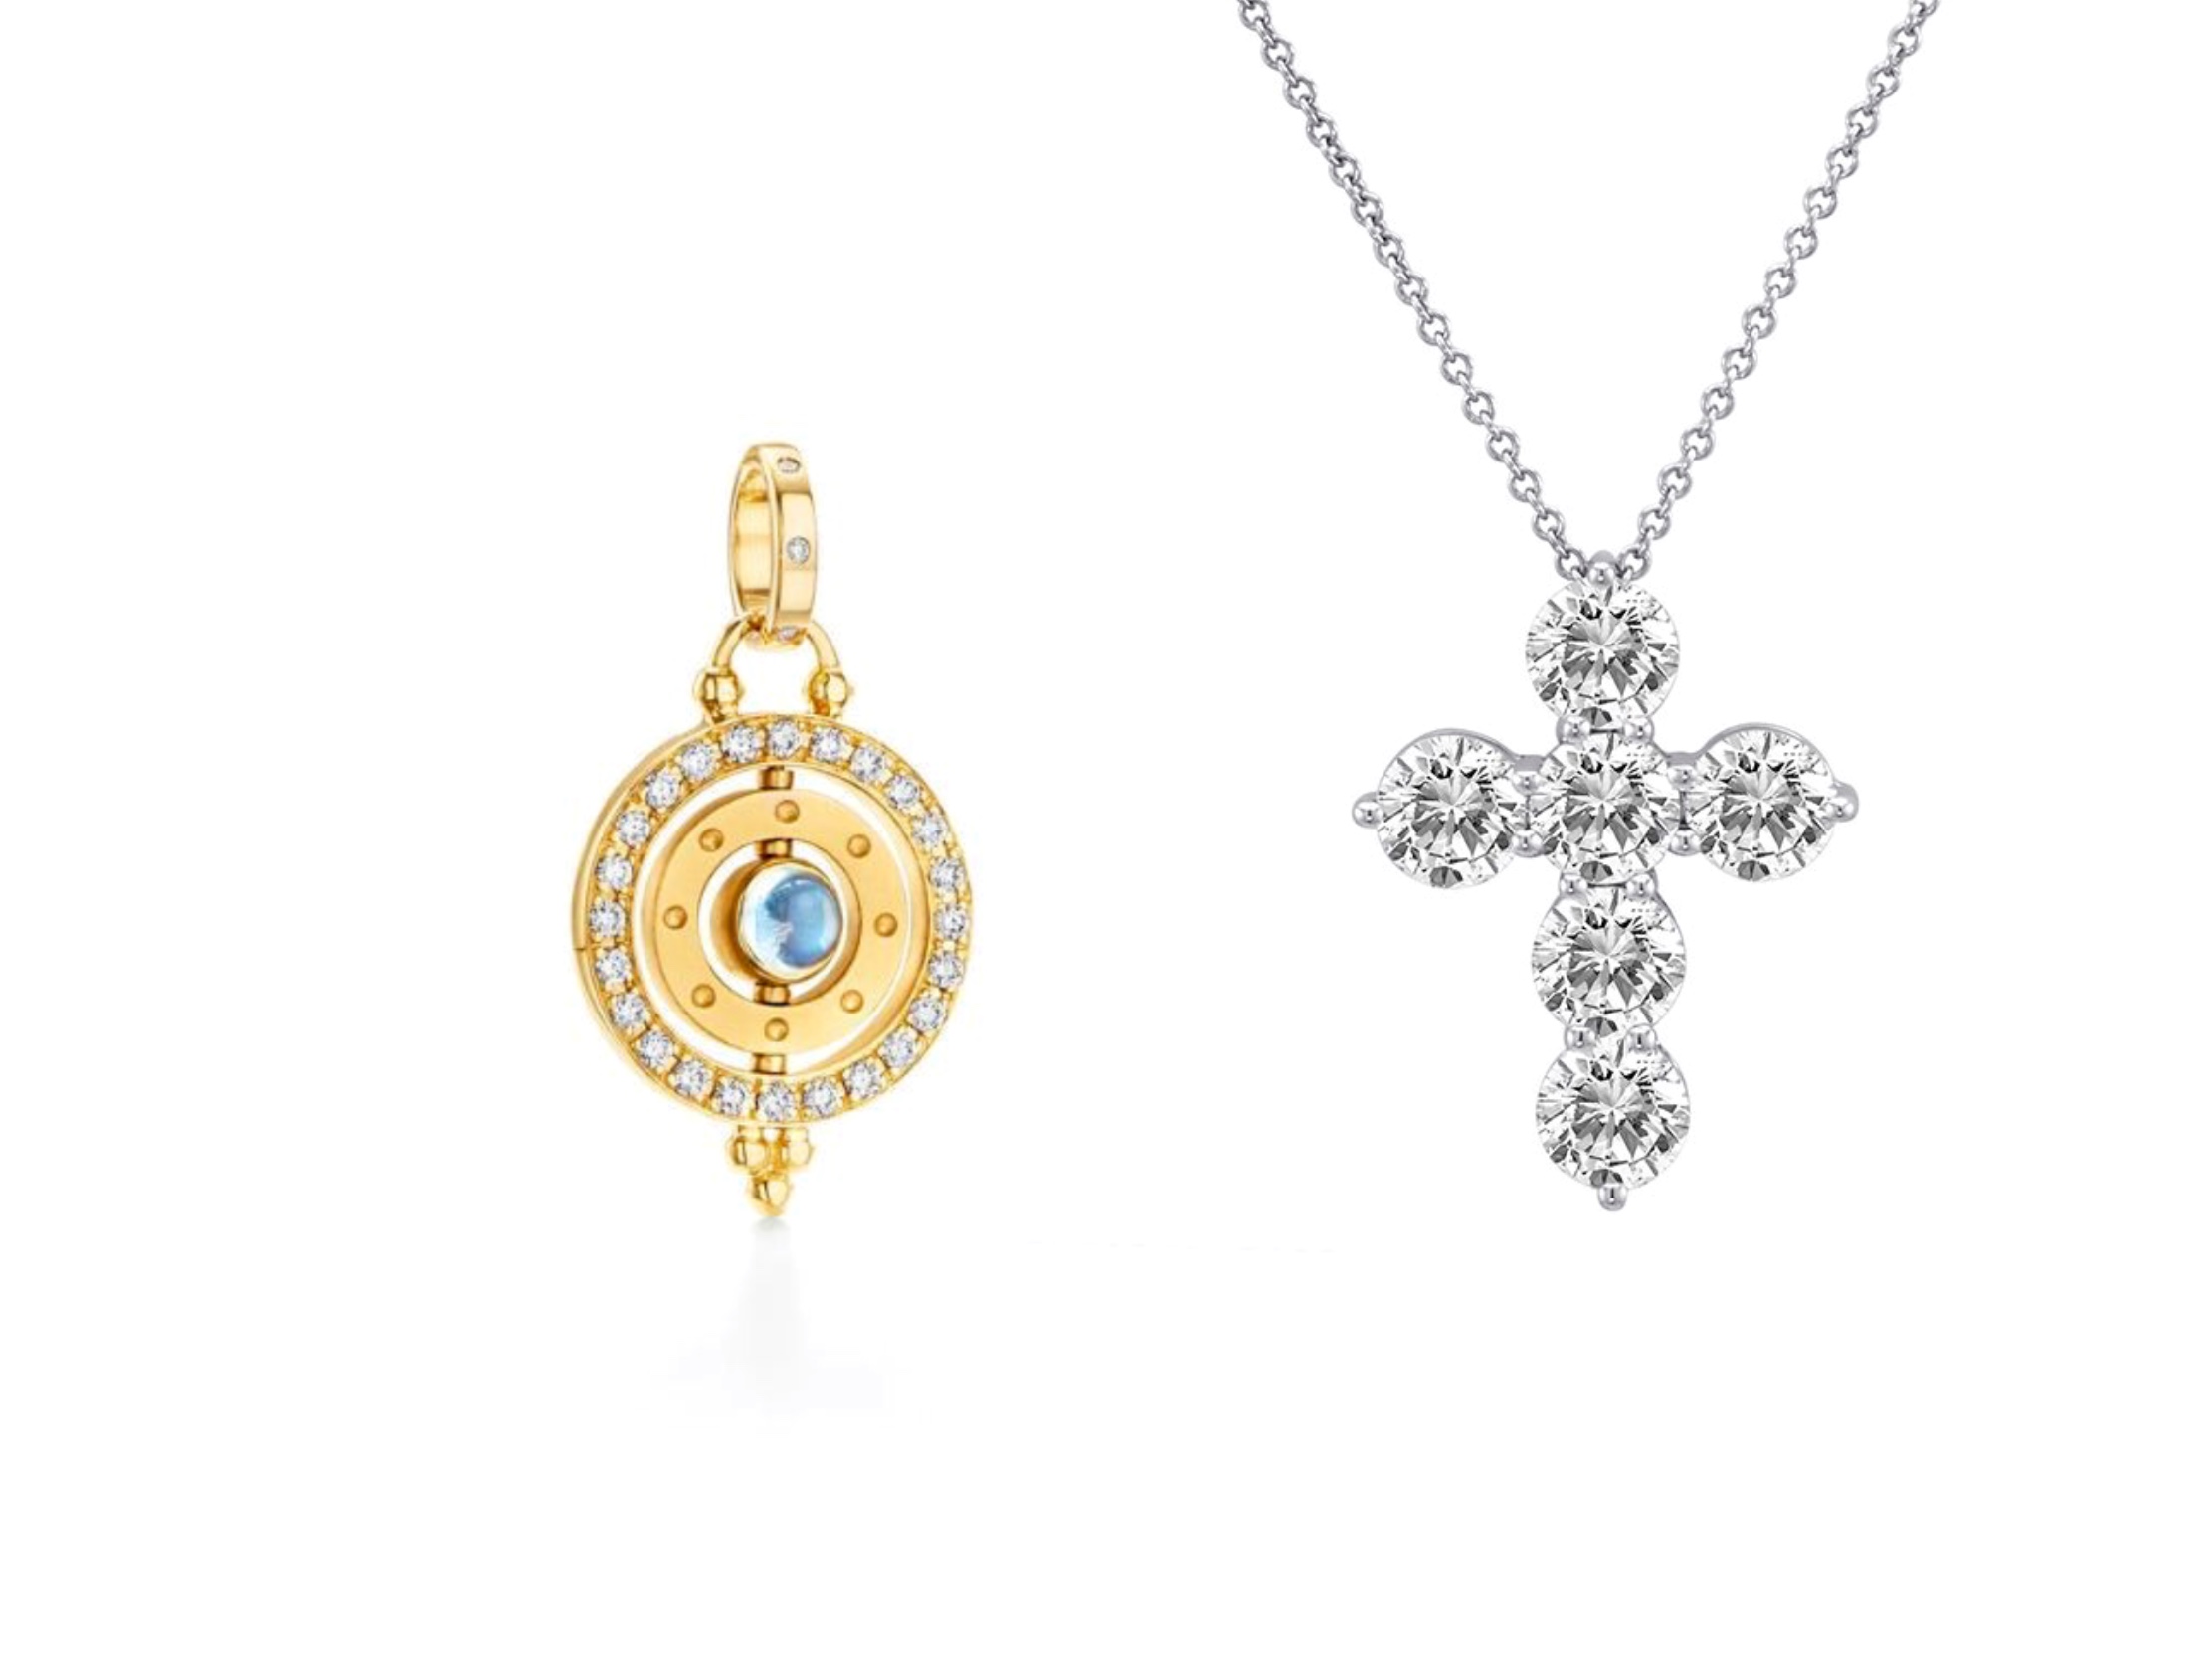 Yellow gold and diamond orbit pendant with moonstone center by Temple St. Clair and 6 diamond shared prong cross pendant by Deutsch Signature — both available at Deutsch Fine Jewelry in Houston, Texas.